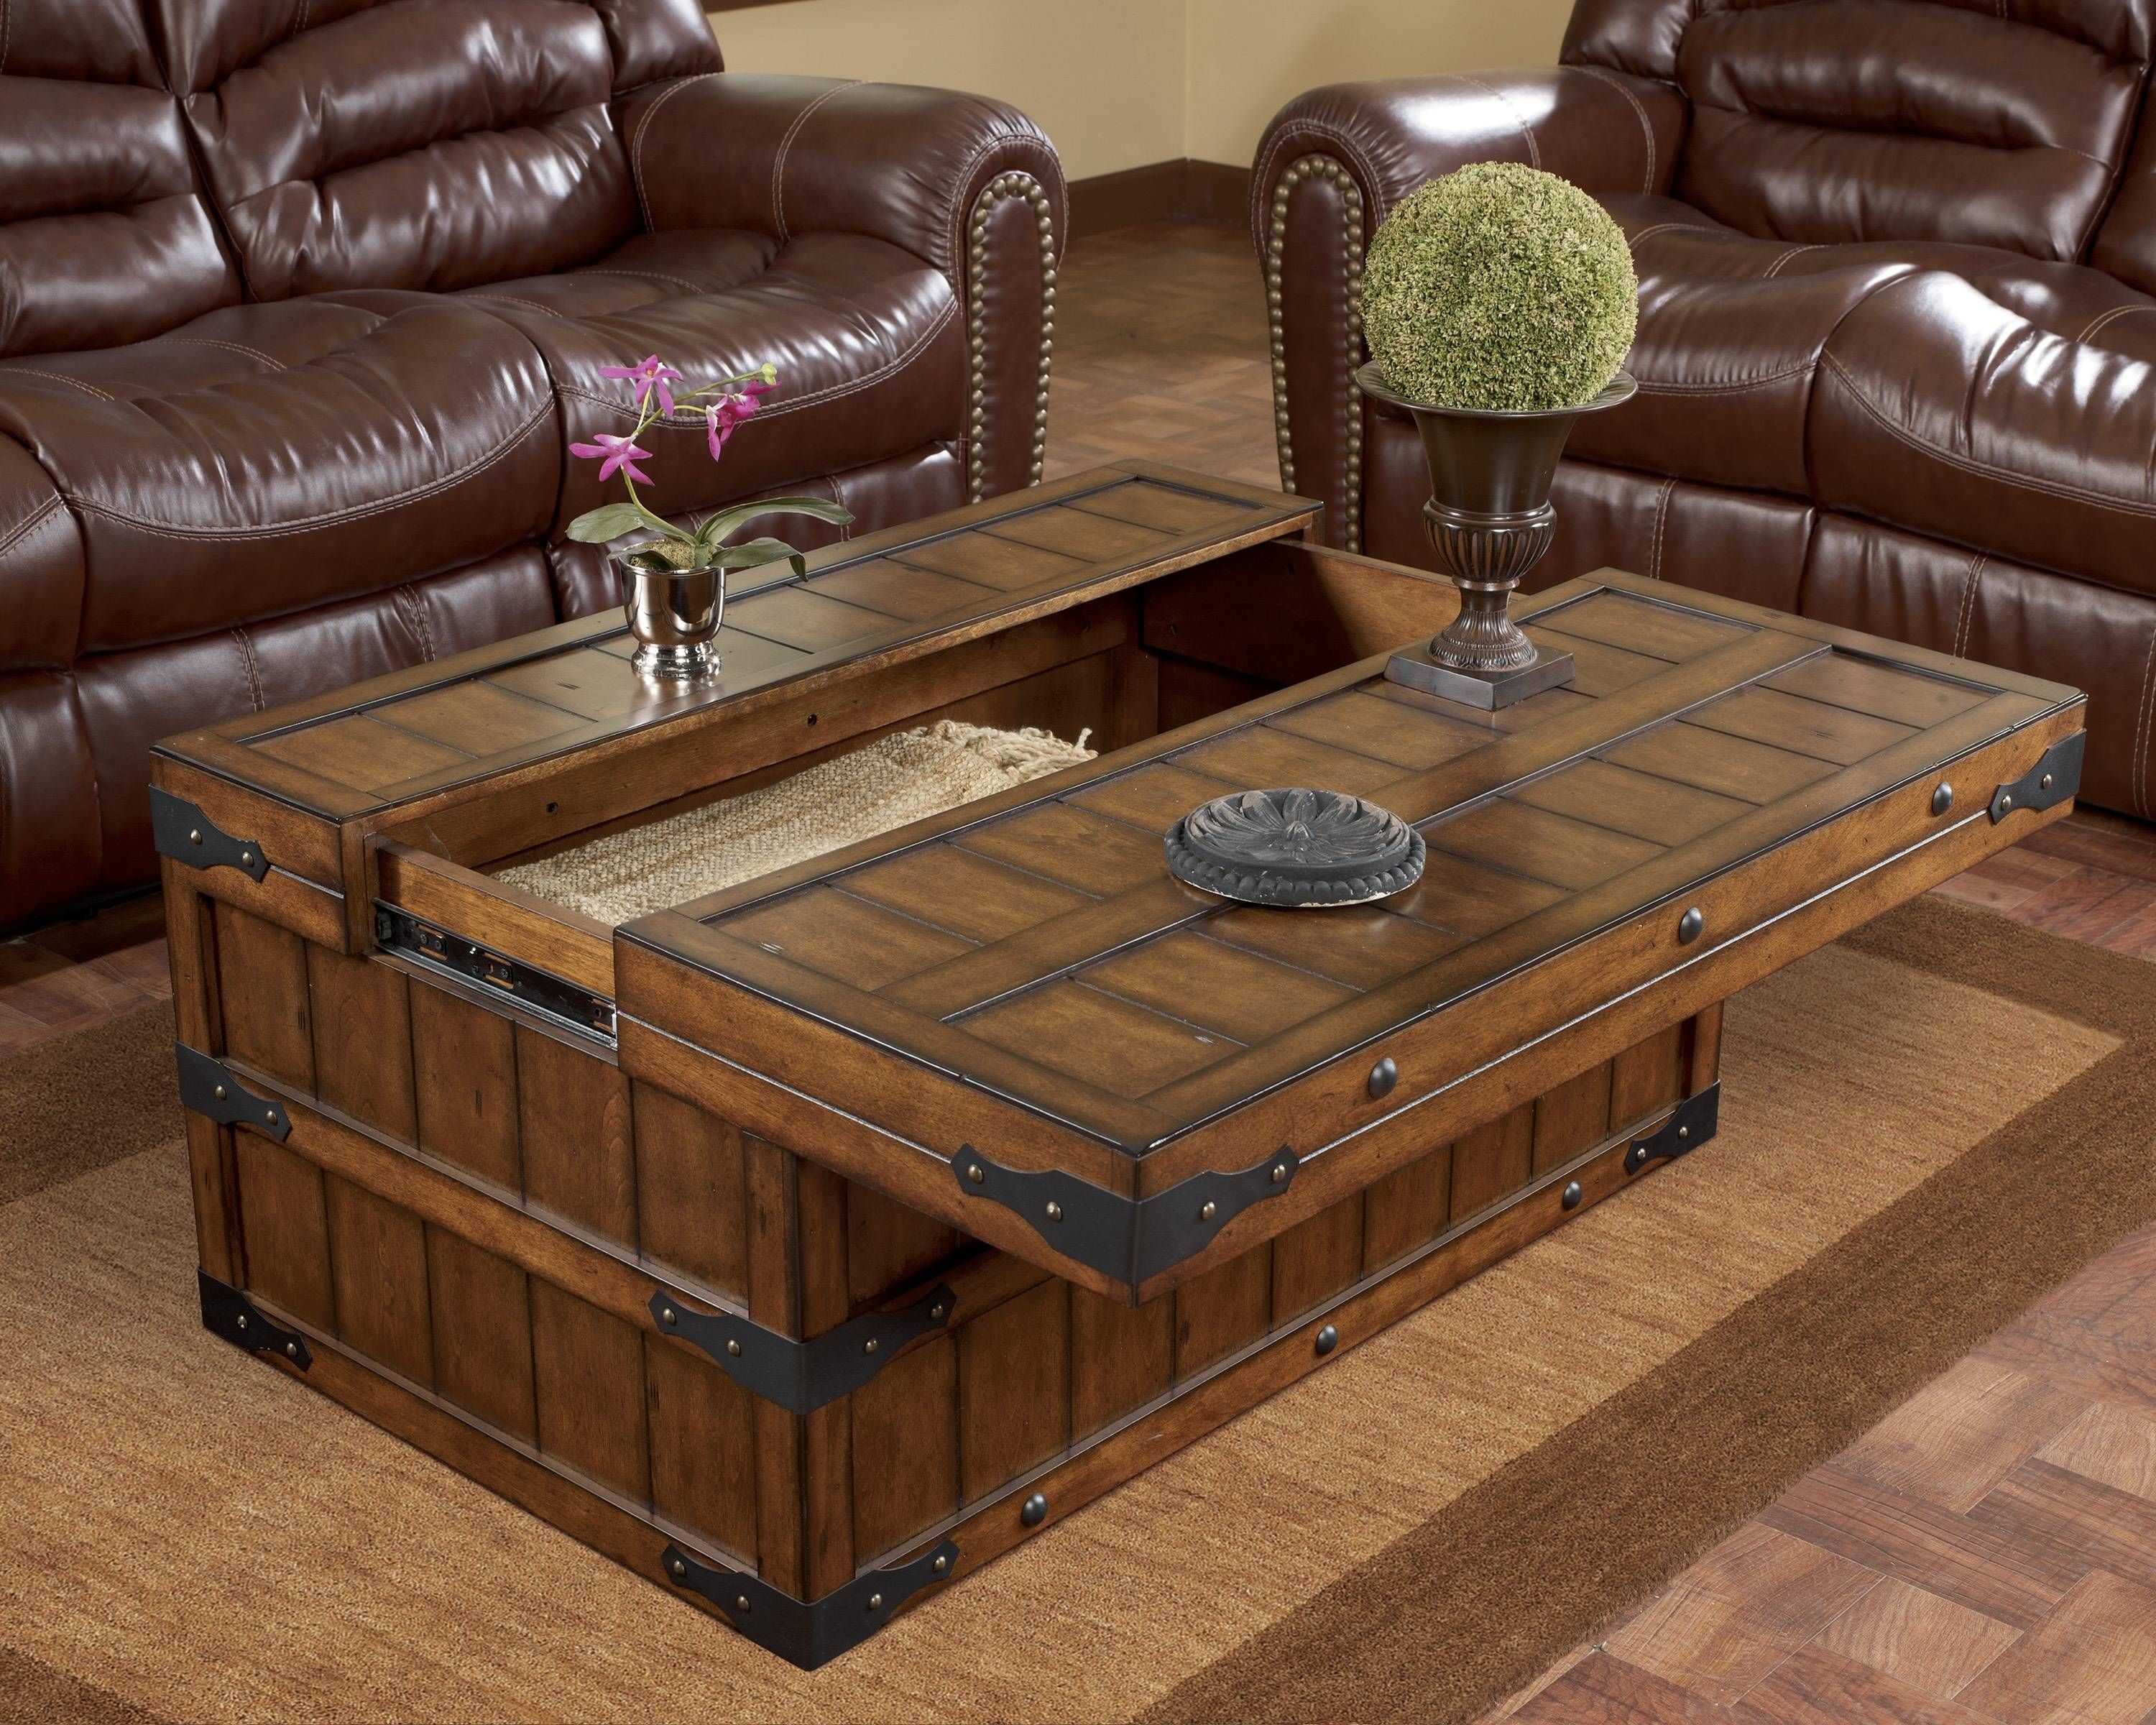 Large Tray For Ottoman Coffee Table Uk – Coffee Addicts Throughout Large Coffee Table With Storage (View 4 of 12)